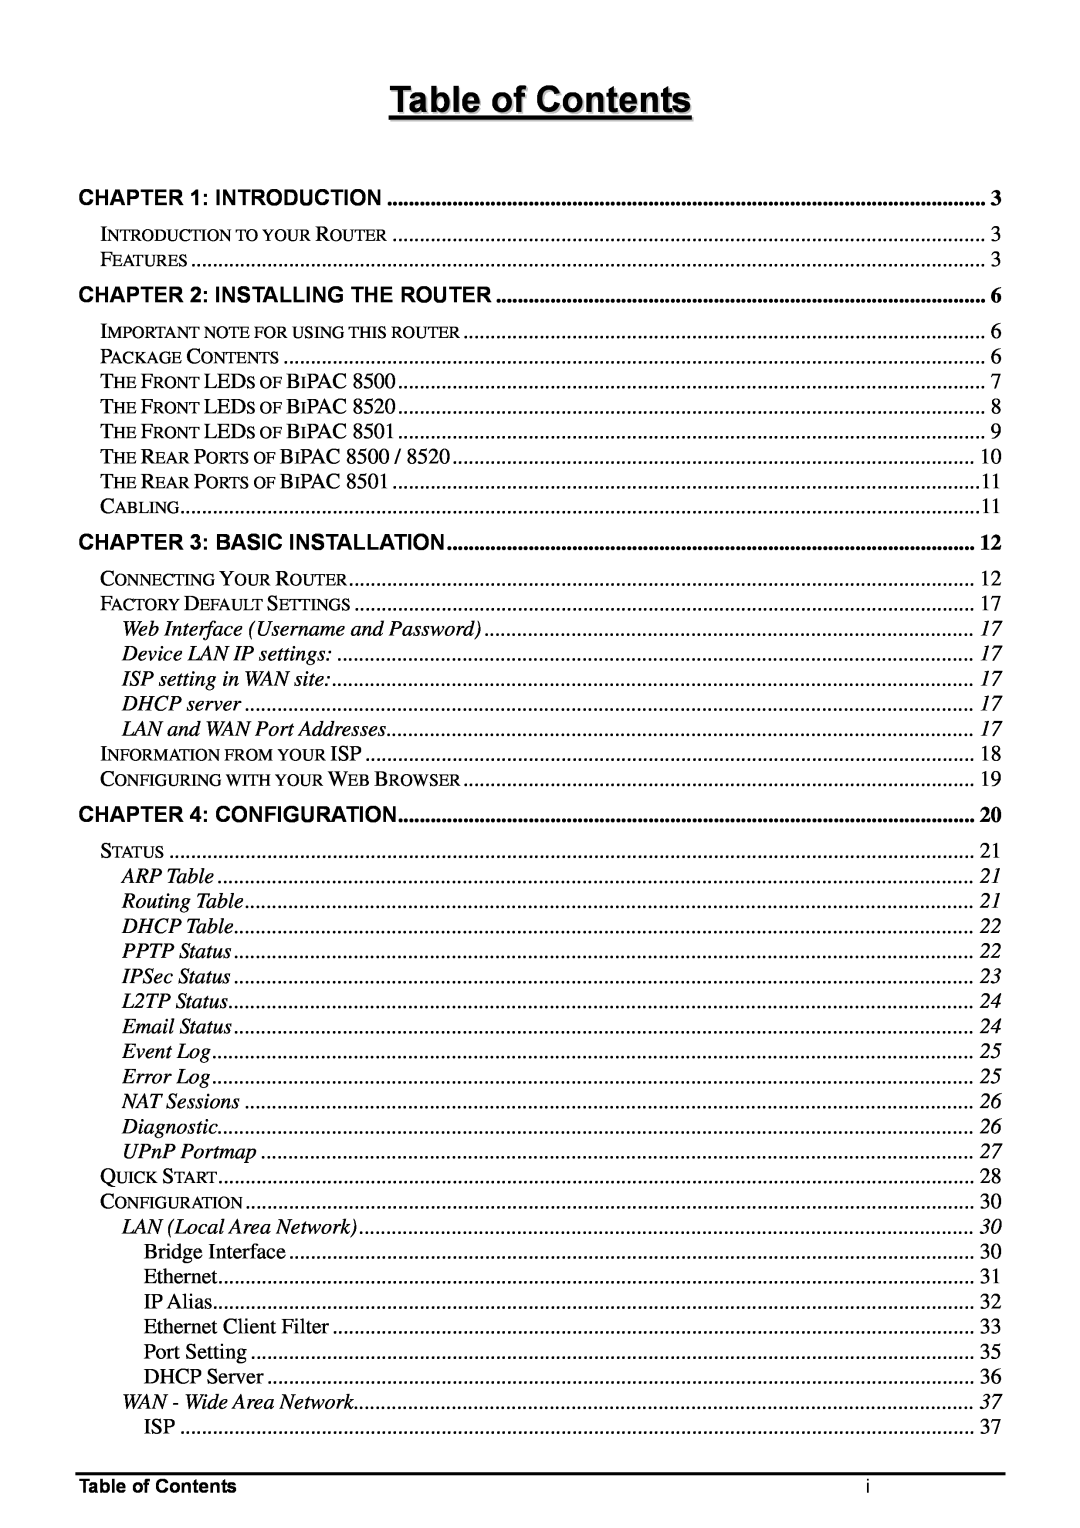 Billion Electric Company 8501 user manual Table of Contents 